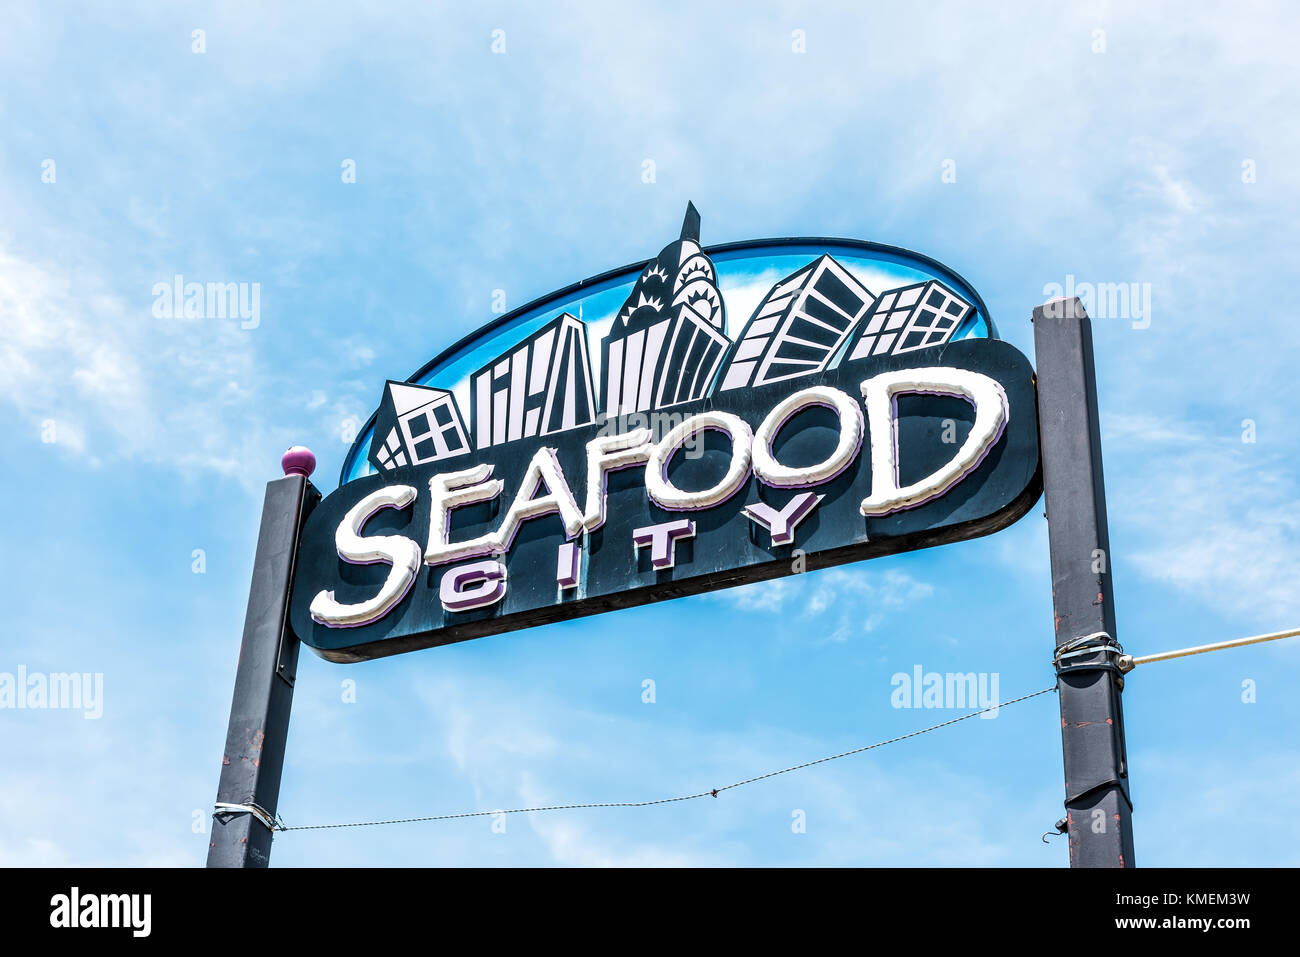 Bronx, USA - June 11, 2017: Restaurant sign in City Island called Seafood City on the water waterfront Stock Photo